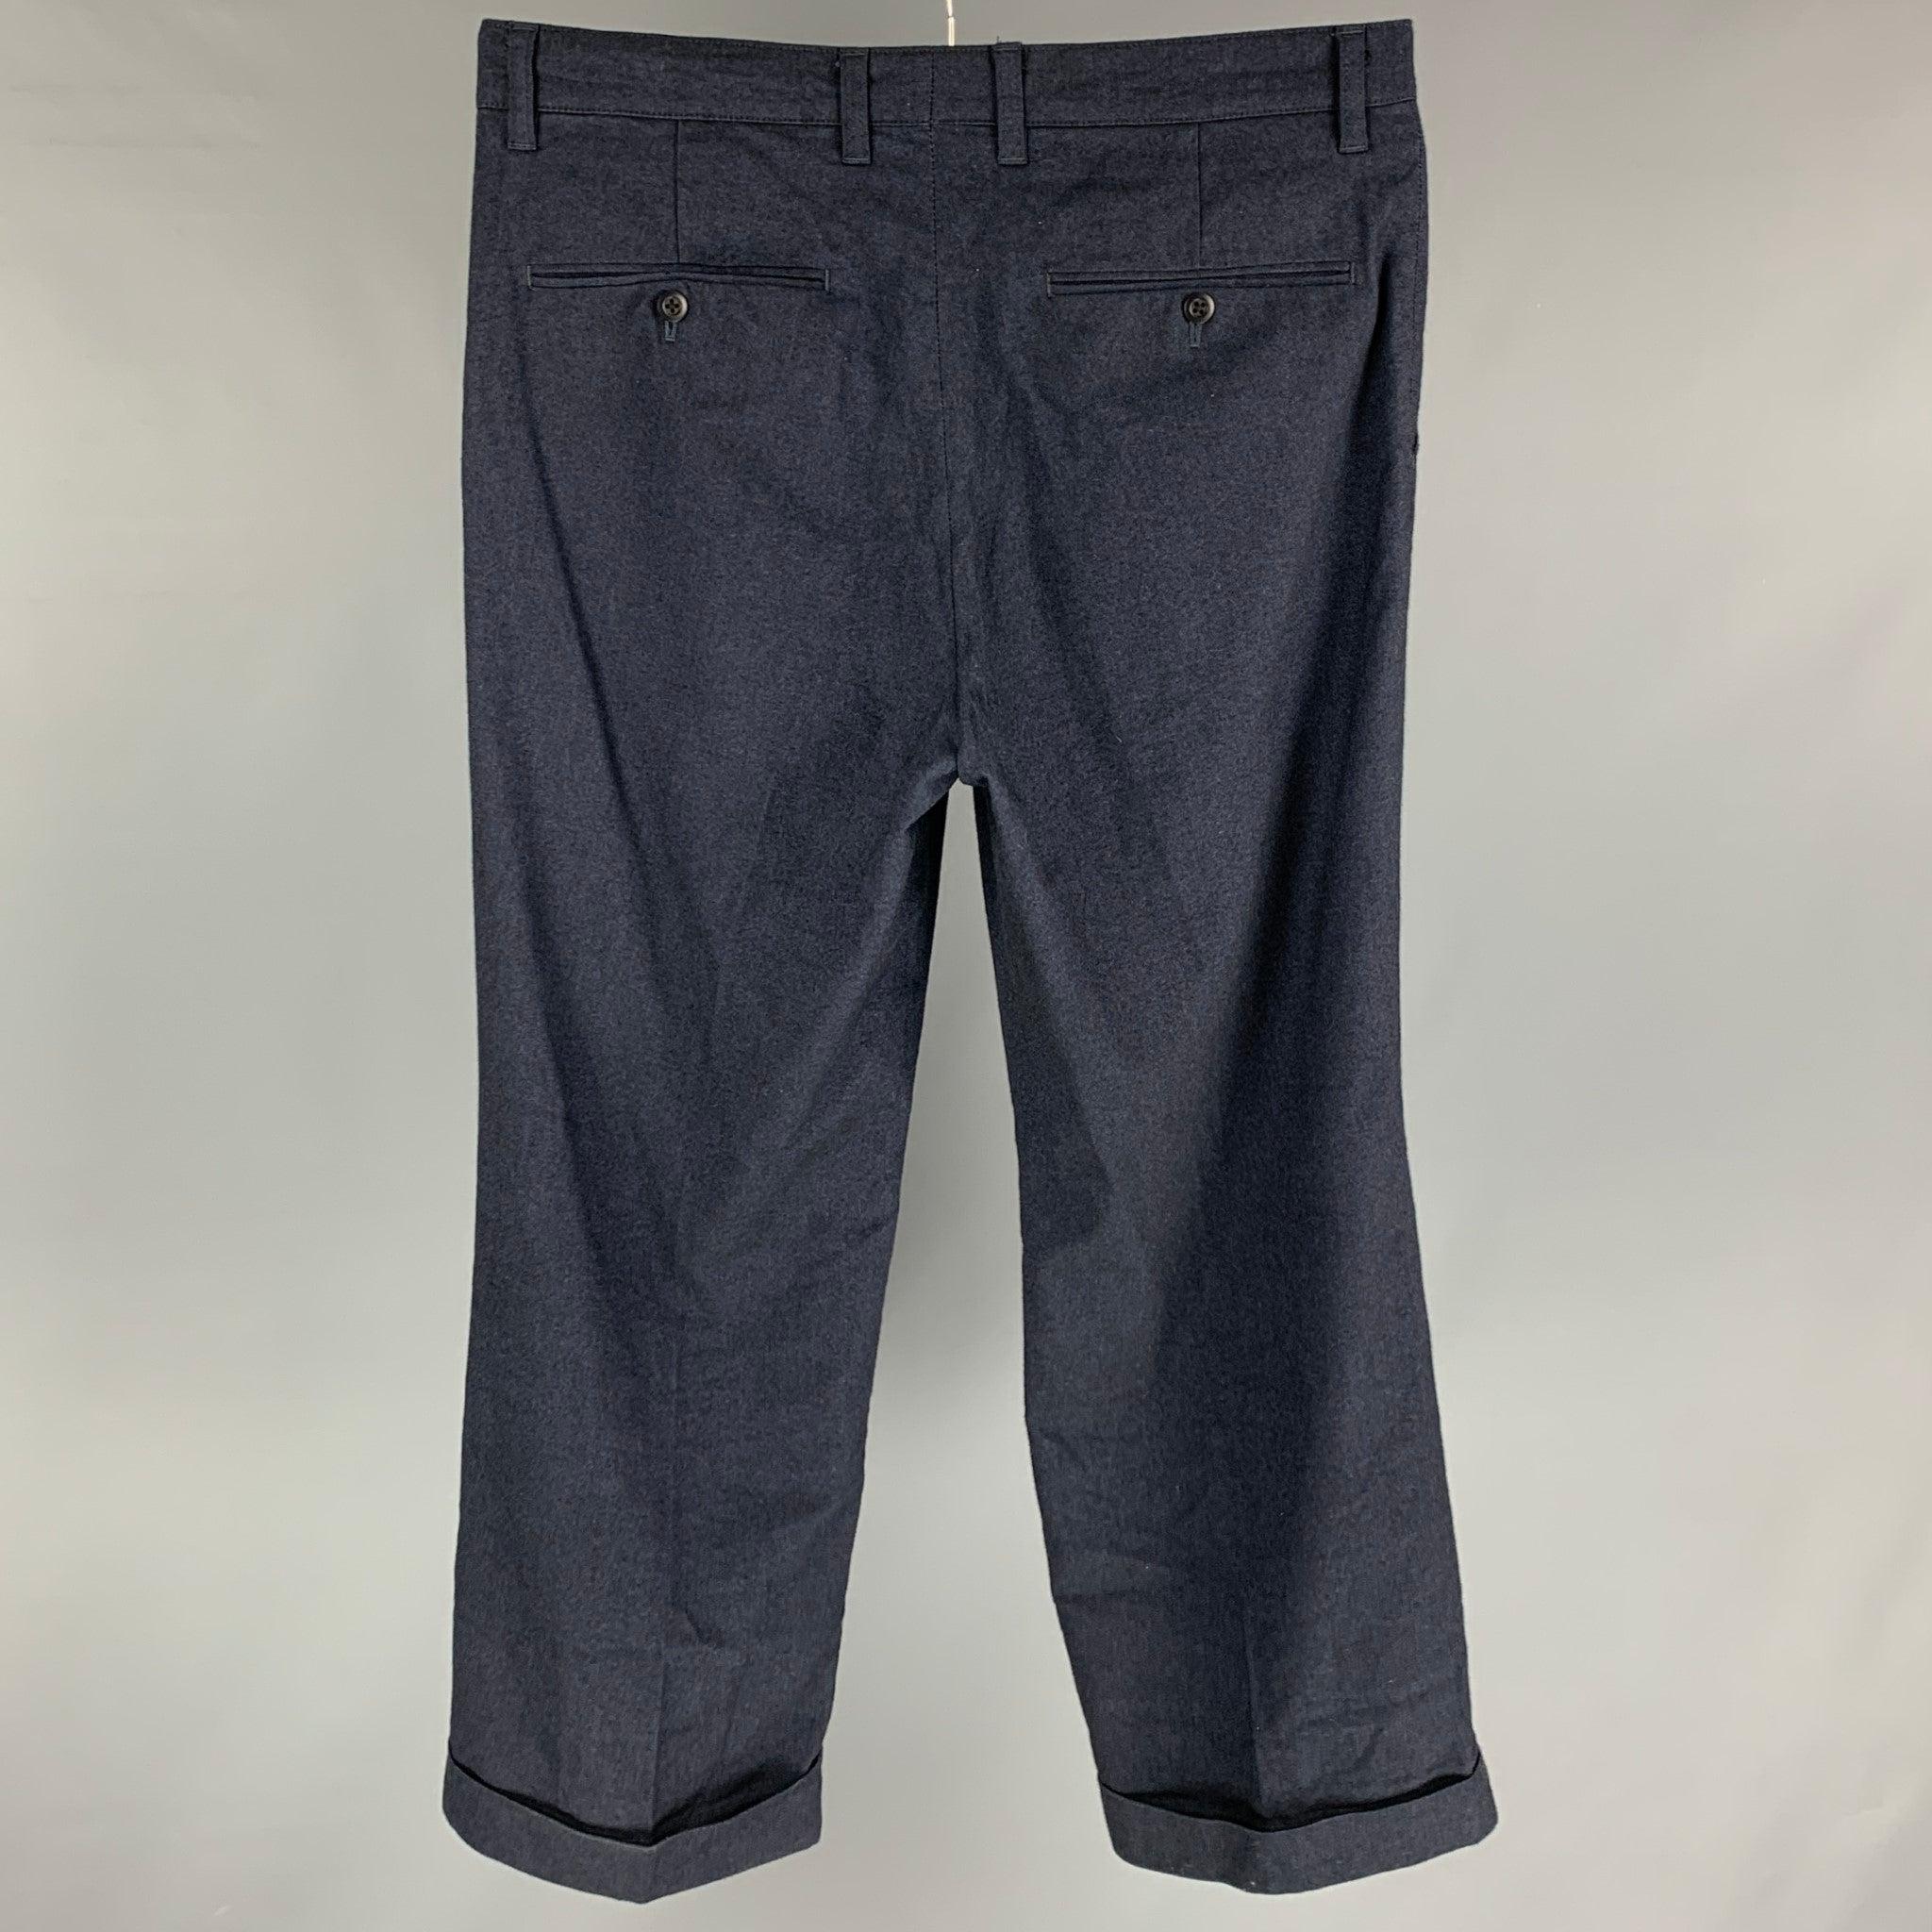 TS (S) Size M Indigo Cotton Blend Pleated Casual Pants In Good Condition For Sale In San Francisco, CA